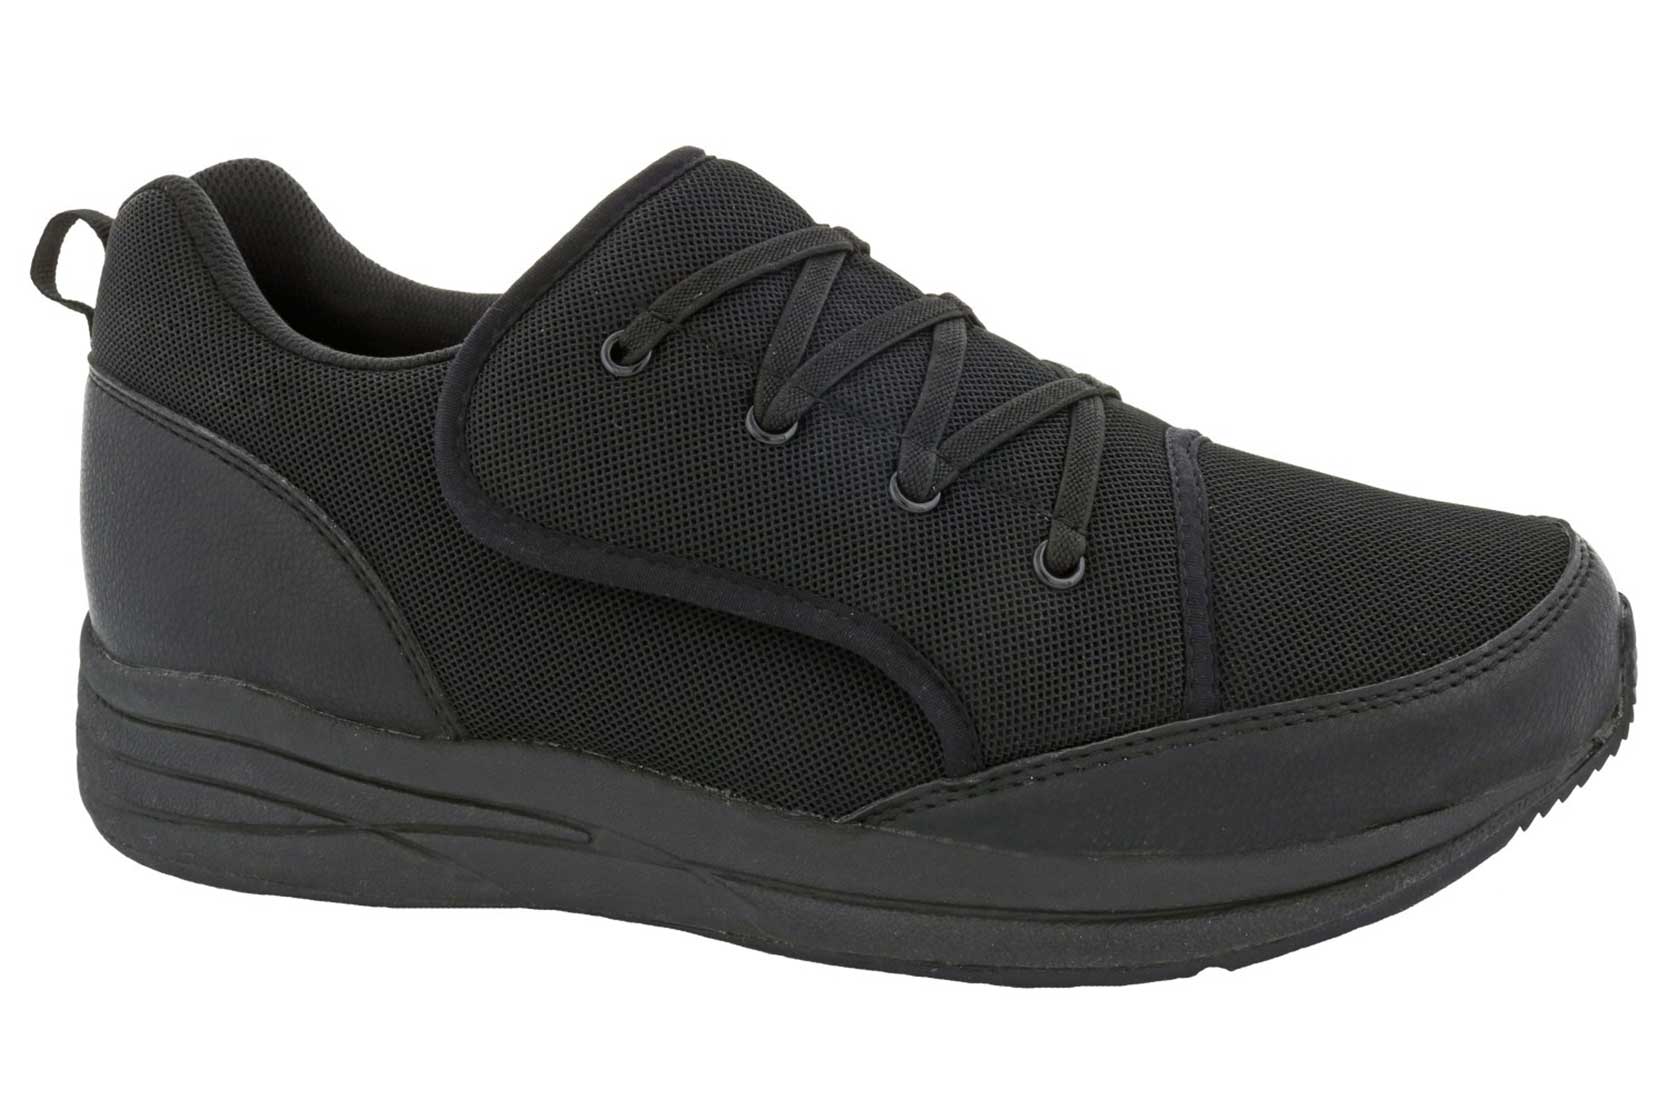 Drew Shoes Strength 40205 - Men's Casual Comfort Therapeutic Shoe